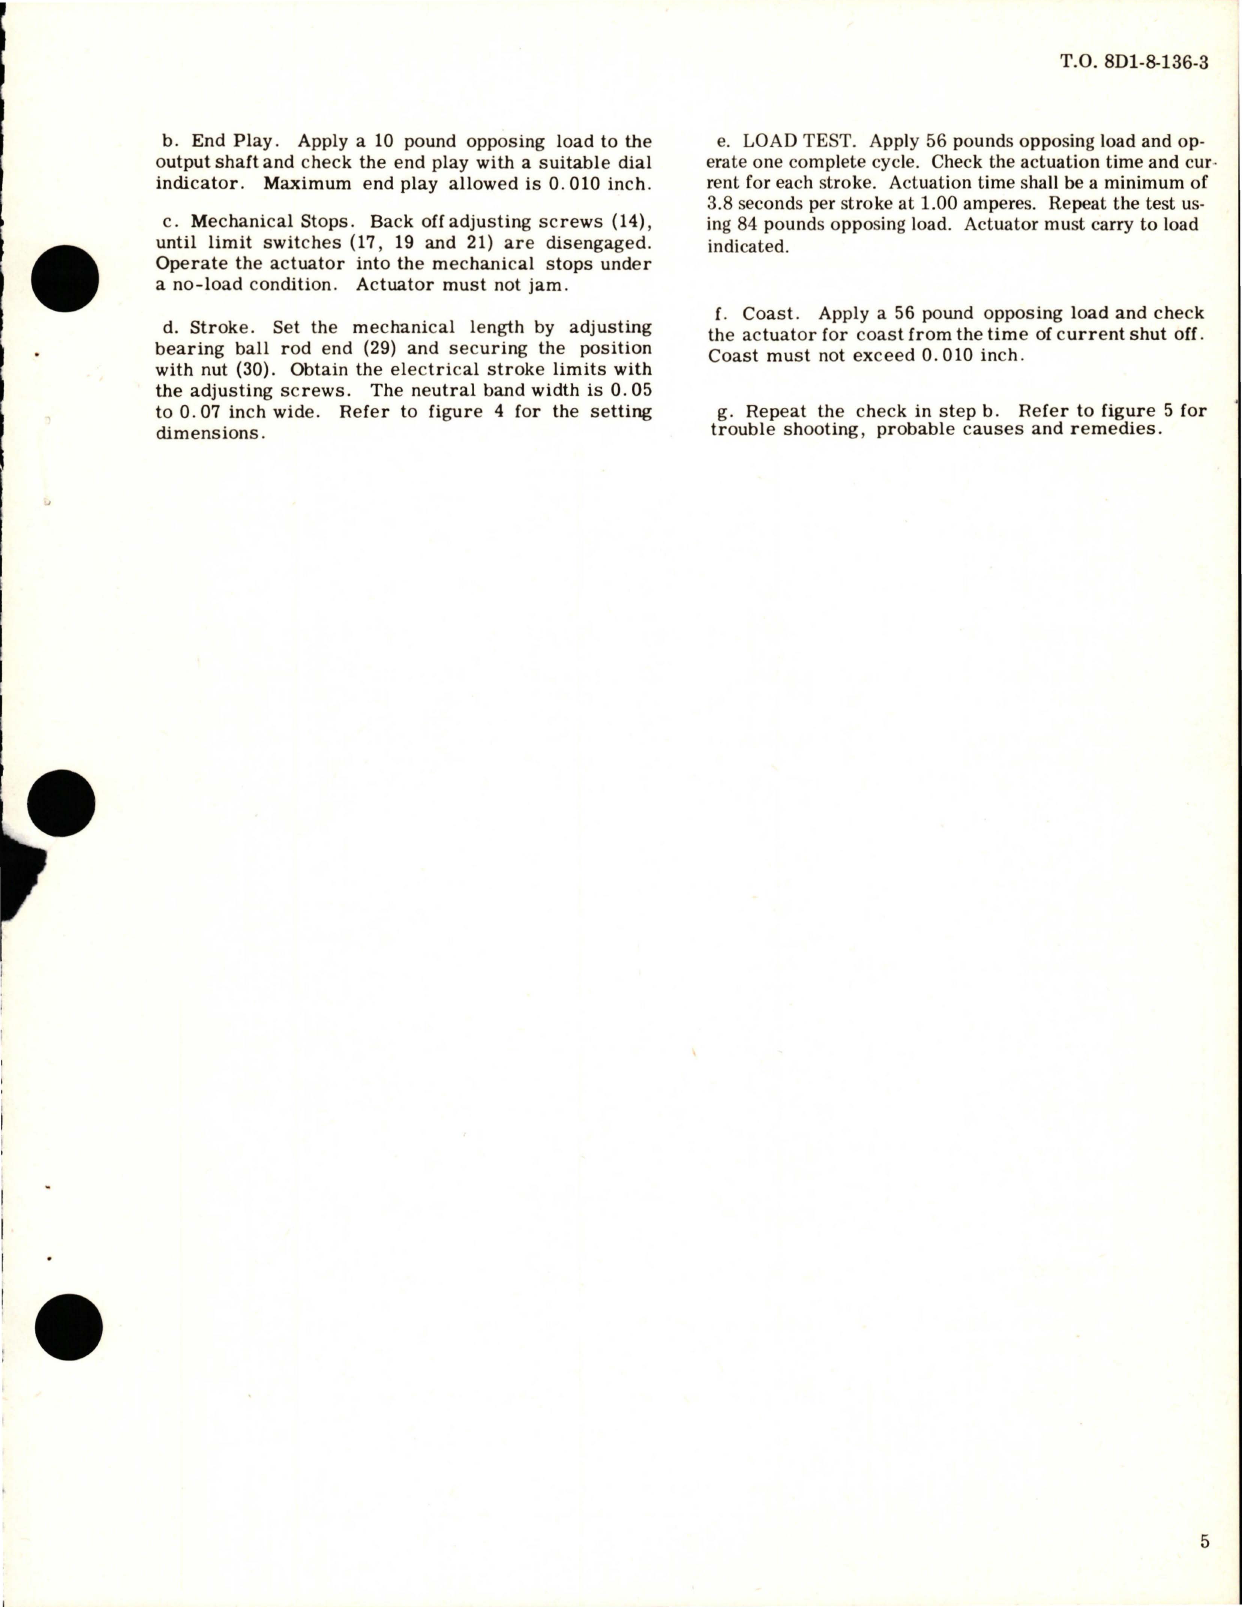 Sample page 5 from AirCorps Library document: Overhaul Instructions with Parts for Electro Mechanical Linear Actuator - Models R-5210M1-1 and R-5210M1-2